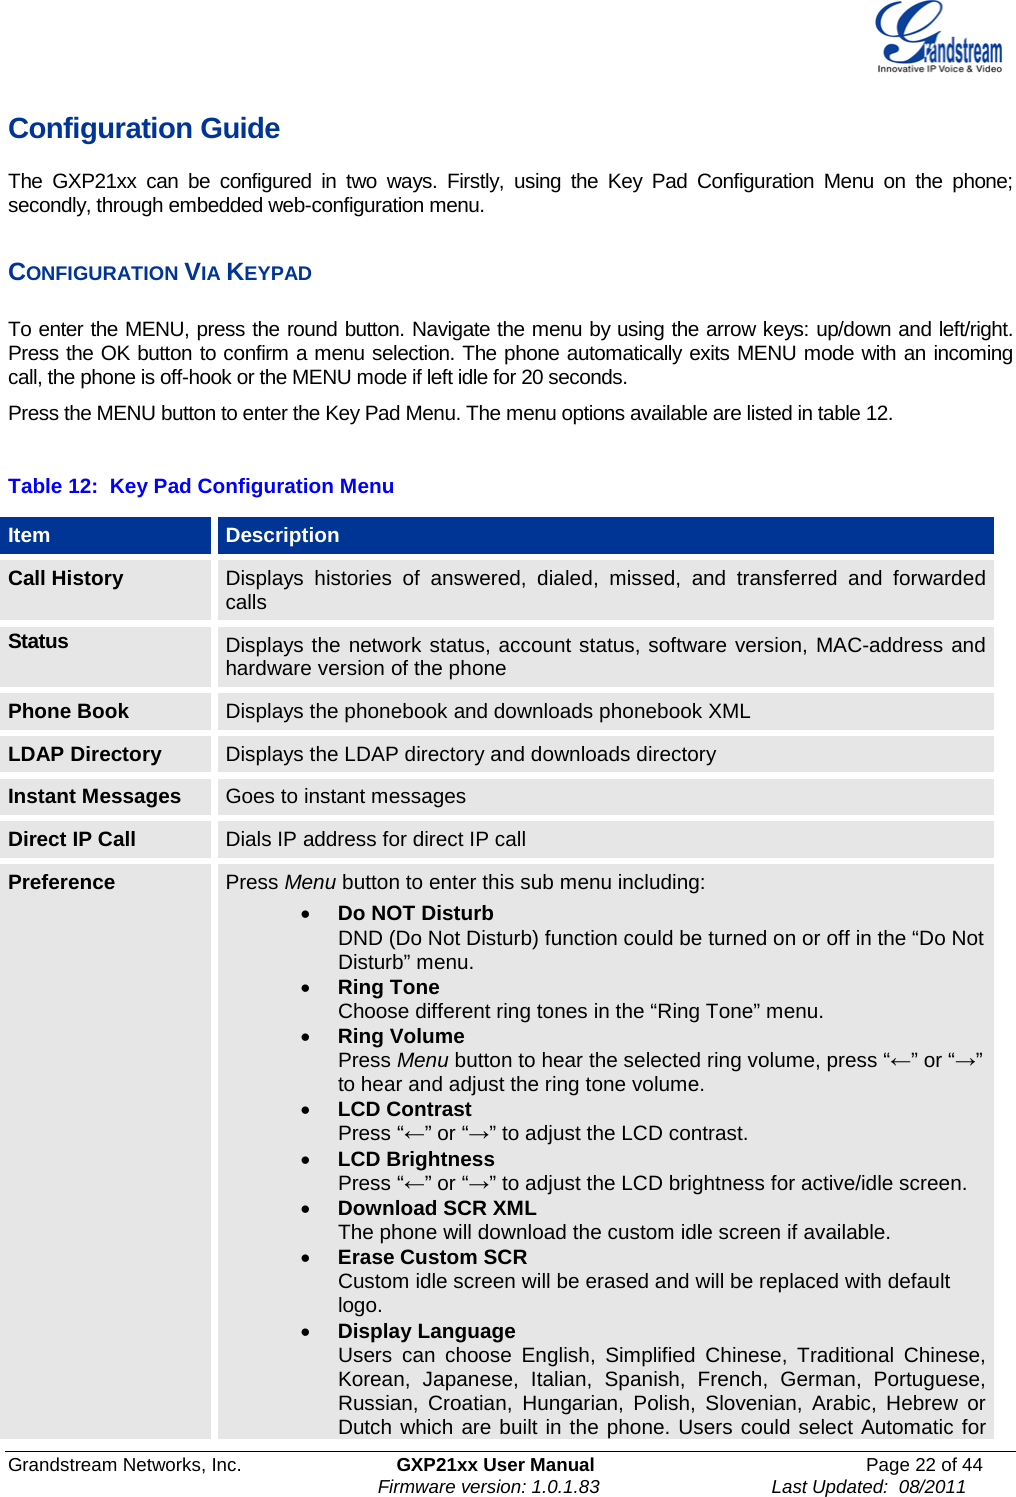  Grandstream Networks, Inc. GXP21xx User Manual Page 22 of 44                                                               Firmware version: 1.0.1.83                                 Last Updated:  08/2011  Configuration Guide The  GXP21xx can be configured in two ways. Firstly, using the Key Pad Configuration Menu on the phone; secondly, through embedded web-configuration menu.  CONFIGURATION VIA KEYPAD  To enter the MENU, press the round button. Navigate the menu by using the arrow keys: up/down and left/right. Press the OK button to confirm a menu selection. The phone automatically exits MENU mode with an incoming call, the phone is off-hook or the MENU mode if left idle for 20 seconds. Press the MENU button to enter the Key Pad Menu. The menu options available are listed in table 12.  Table 12:  Key Pad Configuration Menu Item Description Call History Displays histories of answered, dialed,  missed,  and transferred and forwarded calls Status Displays the network status, account status, software version, MAC-address and hardware version of the phone Phone Book Displays the phonebook and downloads phonebook XML LDAP Directory Displays the LDAP directory and downloads directory Instant Messages Goes to instant messages Direct IP Call Dials IP address for direct IP call Preference Press Menu button to enter this sub menu including: • Do NOT Disturb DND (Do Not Disturb) function could be turned on or off in the “Do Not Disturb” menu. • Ring Tone Choose different ring tones in the “Ring Tone” menu. • Ring Volume Press Menu button to hear the selected ring volume, press “←” or “→” to hear and adjust the ring tone volume. • LCD Contrast Press “←” or “→” to adjust the LCD contrast. • LCD Brightness Press “←” or “→” to adjust the LCD brightness for active/idle screen. • Download SCR XML The phone will download the custom idle screen if available. • Erase Custom SCR Custom idle screen will be erased and will be replaced with default logo. • Display Language Users can choose English, Simplified  Chinese, Traditional Chinese, Korean, Japanese, Italian, Spanish, French, German, Portuguese, Russian, Croatian, Hungarian, Polish, Slovenian, Arabic, Hebrew or Dutch which are built in the phone. Users could select Automatic for 